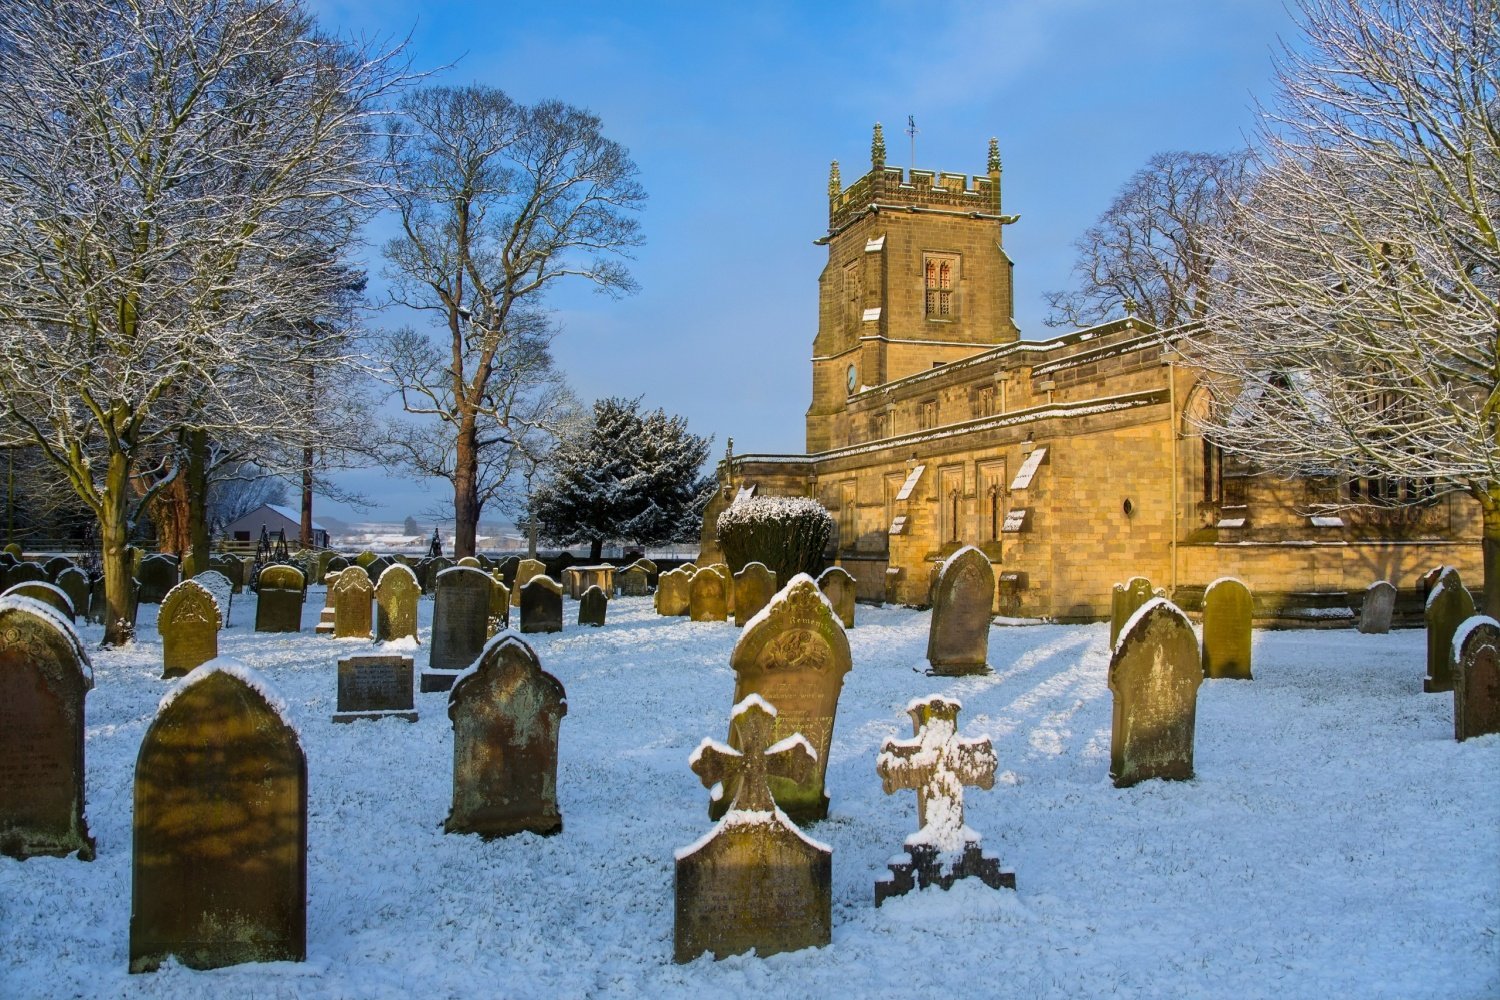 Image name slingsby north yorkshire church in snow the 14 image from the post Slingsby, North Yorkshire in Yorkshire.com.